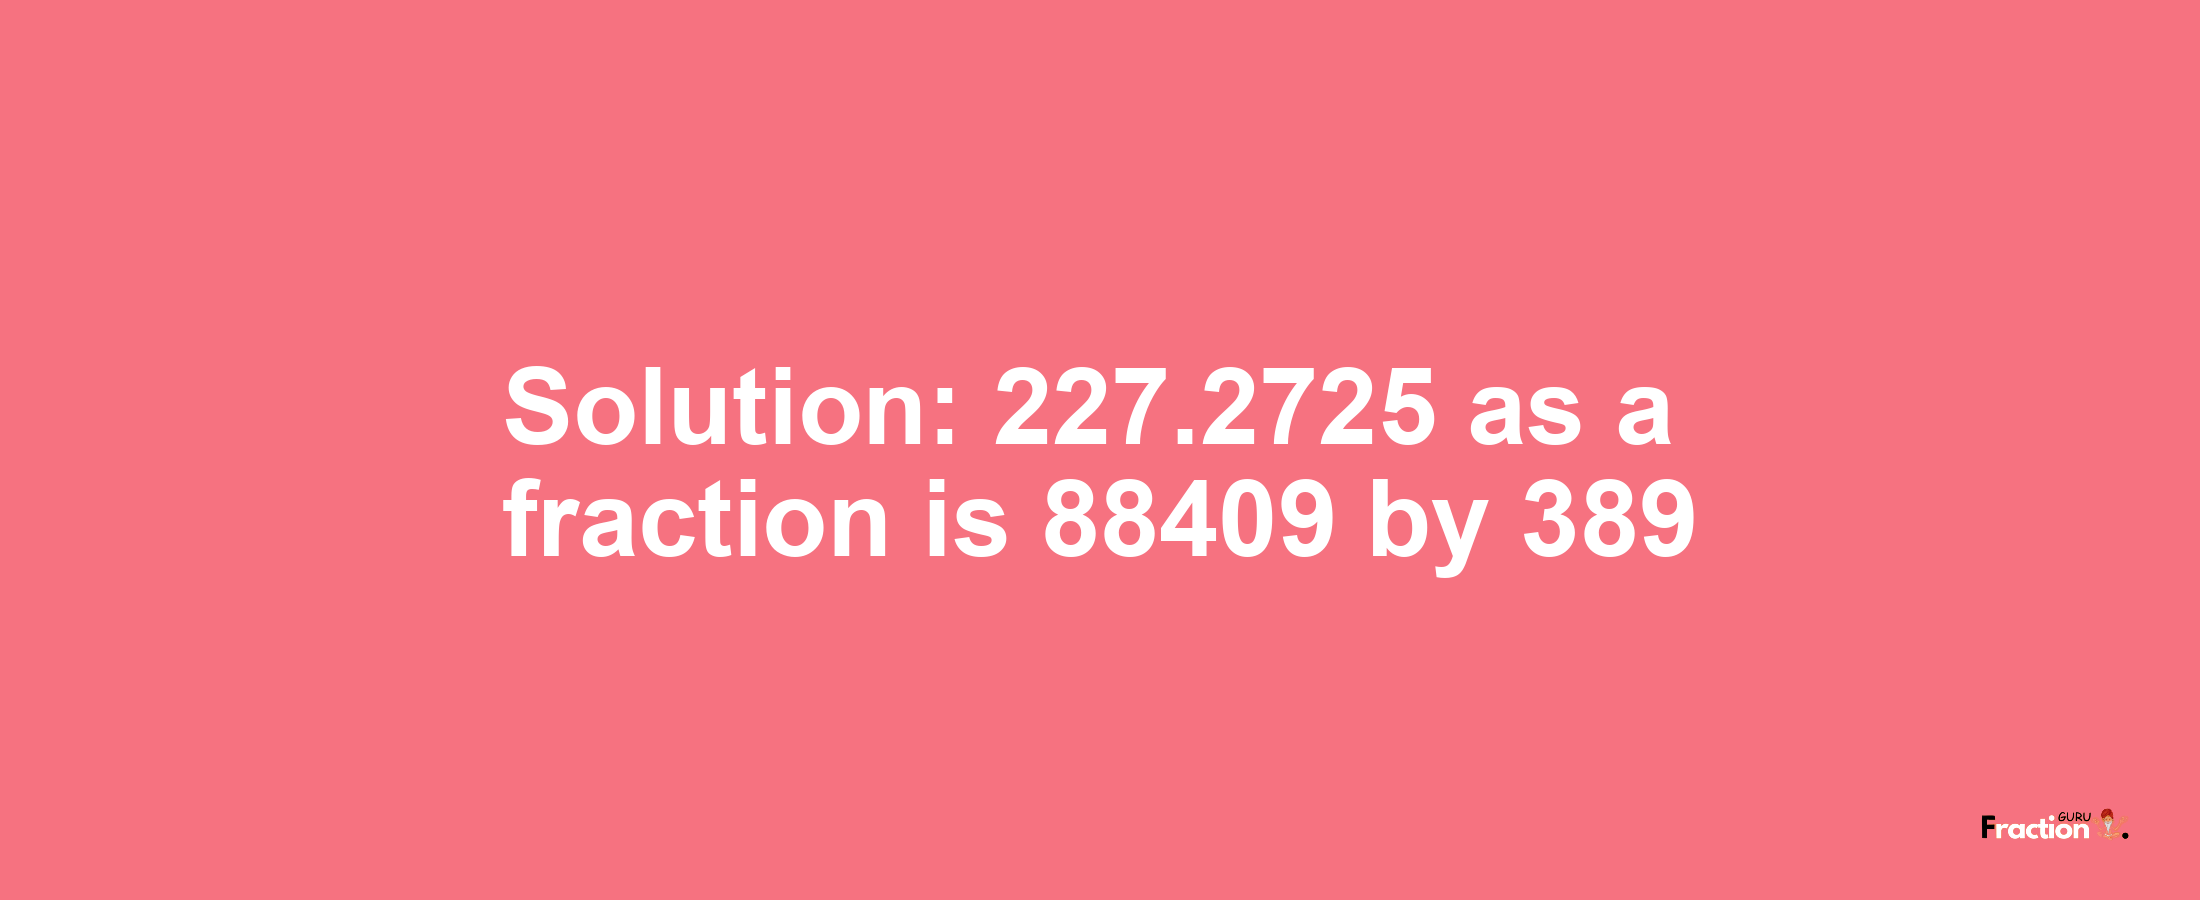 Solution:227.2725 as a fraction is 88409/389